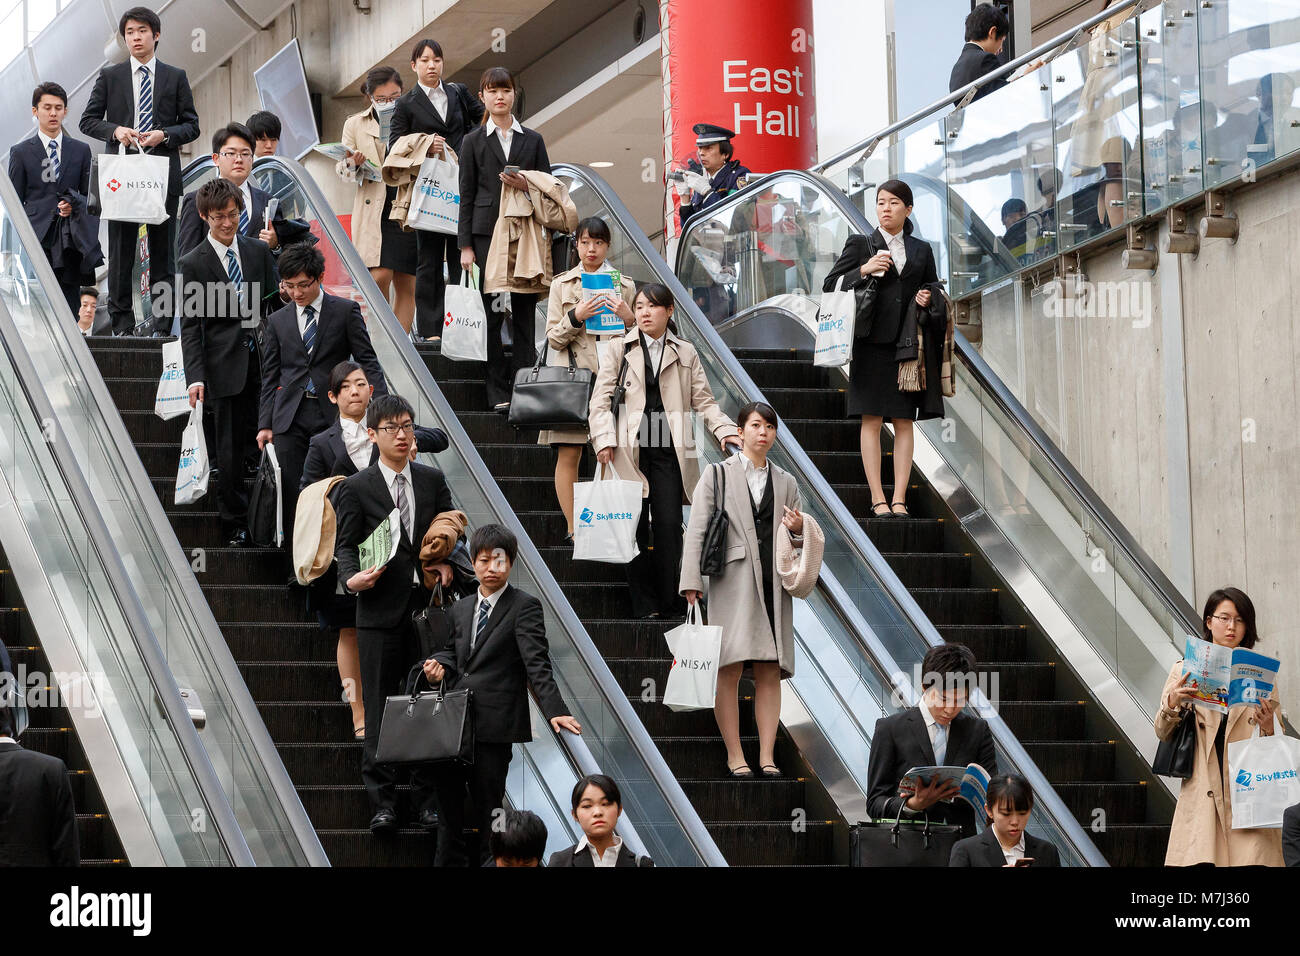 University students gather at a job fair at Tokyo Big Sight on March 11, 2018, Tokyo, Japan. Japanese students who are set to graduate next Spring attended a job fair to listen to career seminars and submit job applications during the two-day fair which started today. Credit: Rodrigo Reyes Marin/AFLO/Alamy Live News Stock Photo